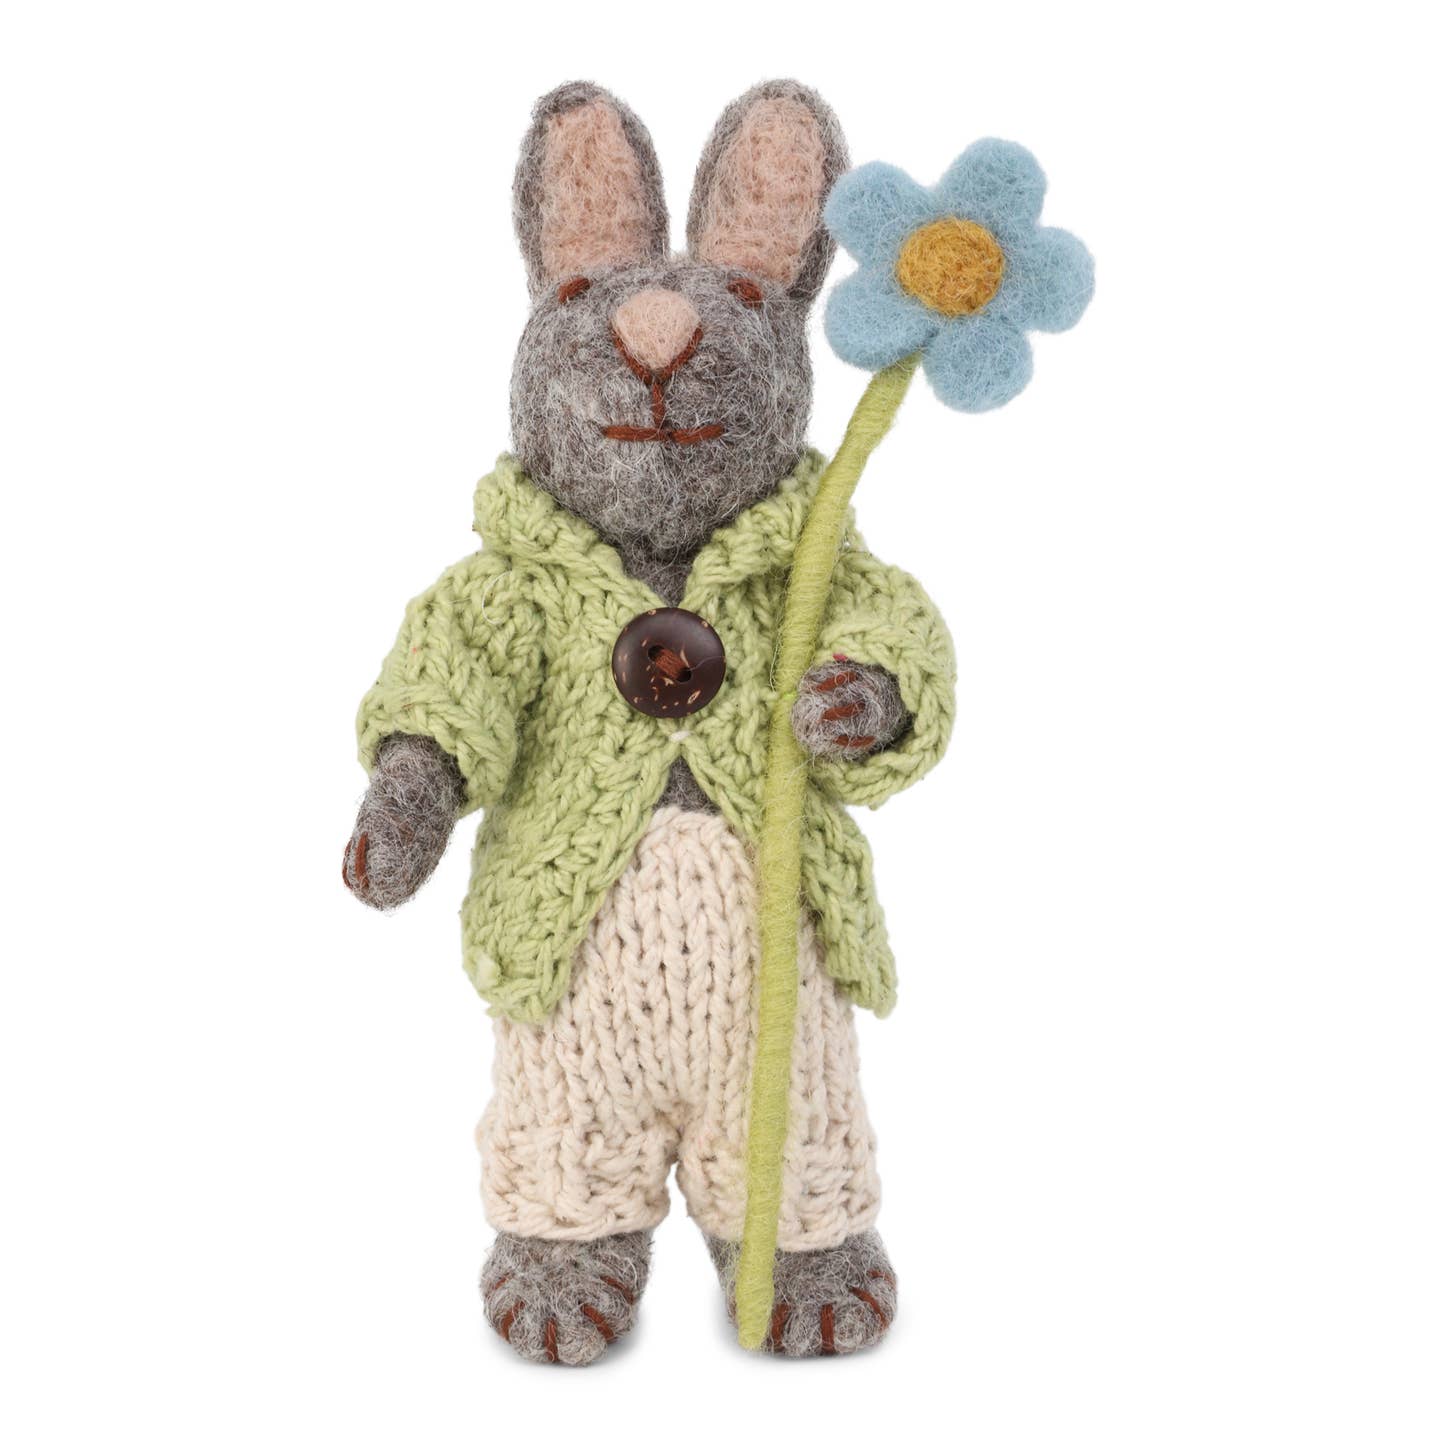 Gry & Sif Felt Small Grey Bunny - Jacket, Pants, and Blue Anemone